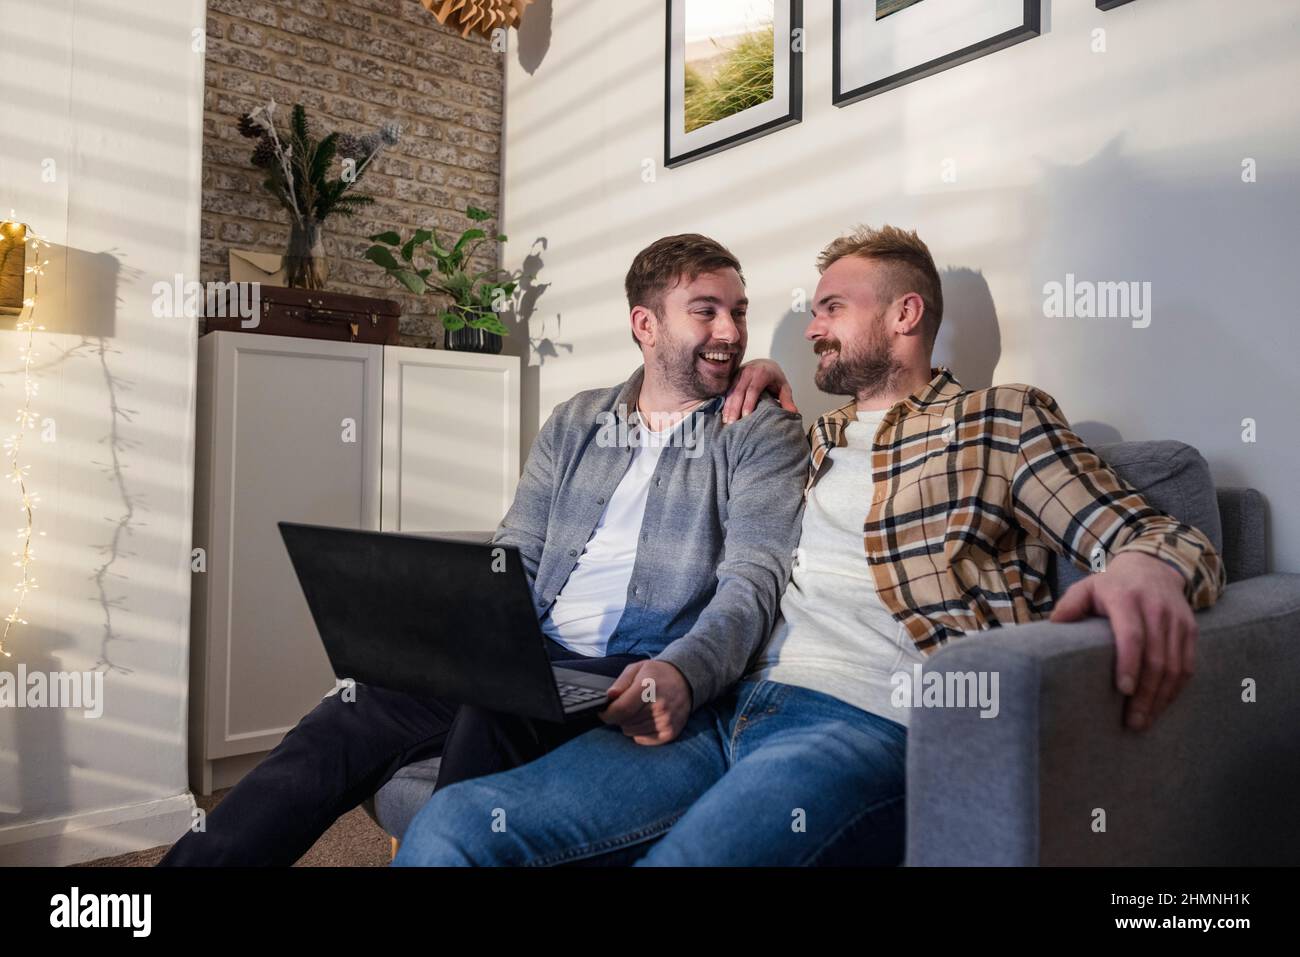 An LGBTQI same sex male couple sitting on their sofa in their living room relaxing, they are using a laptop and smiling to one another. Stock Photo